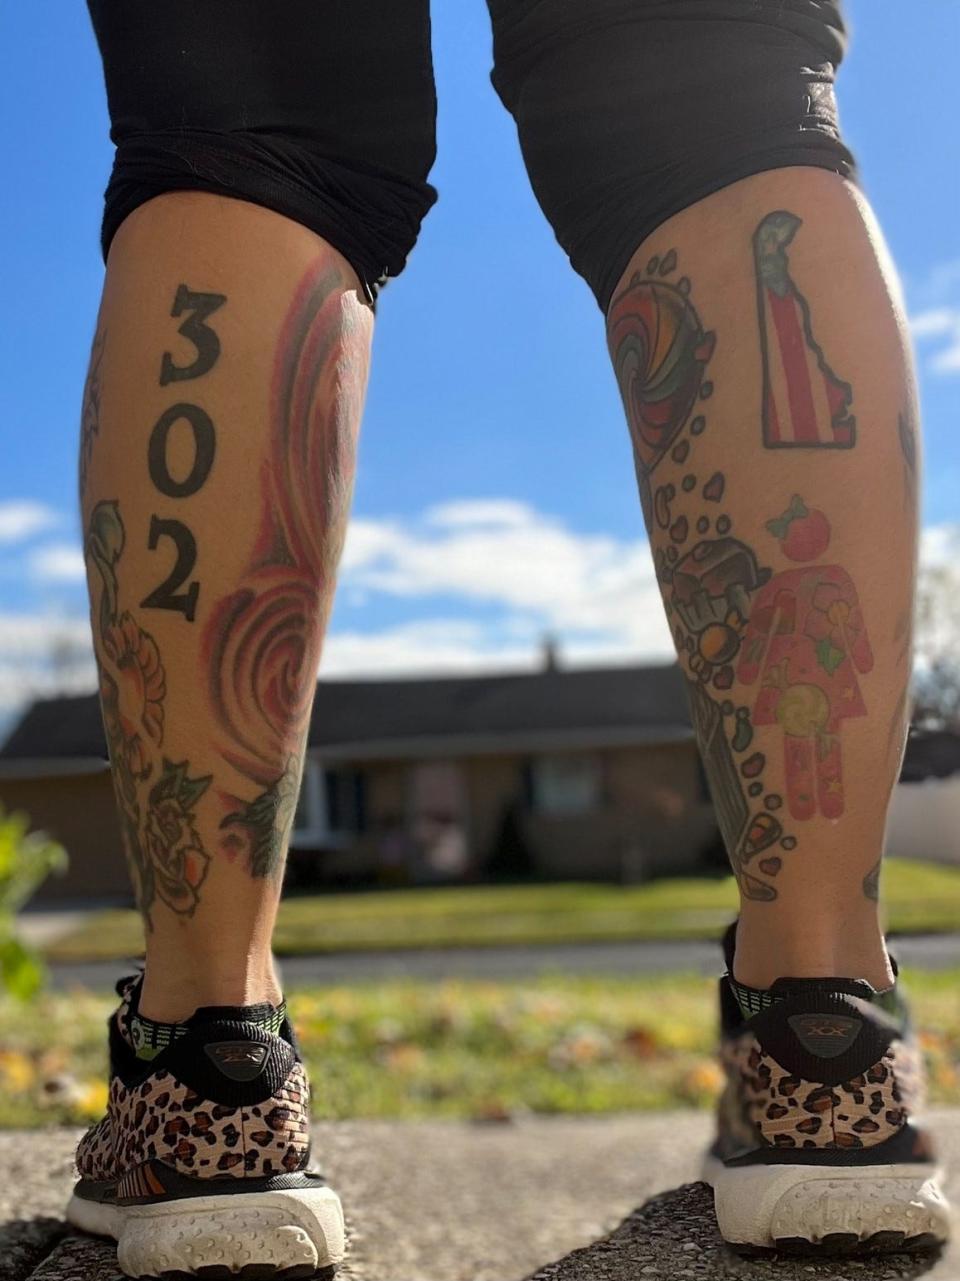 Beca Sanchez shows her Delaware pride with a tattoo on each leg.